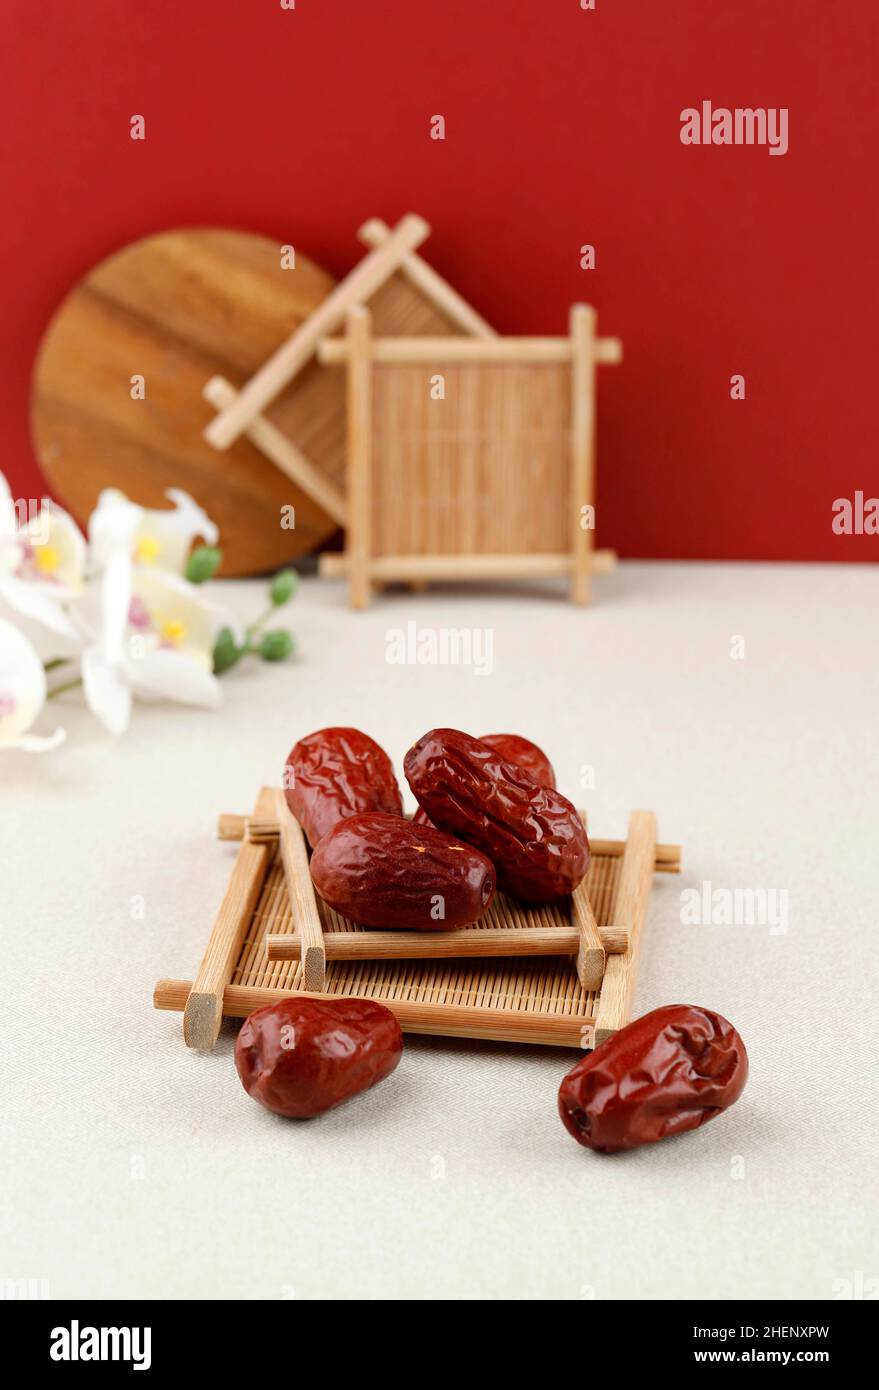 Dried Red Dates or Unabi Fruit Jujube, Chinese Ingredients Food Stock Photo